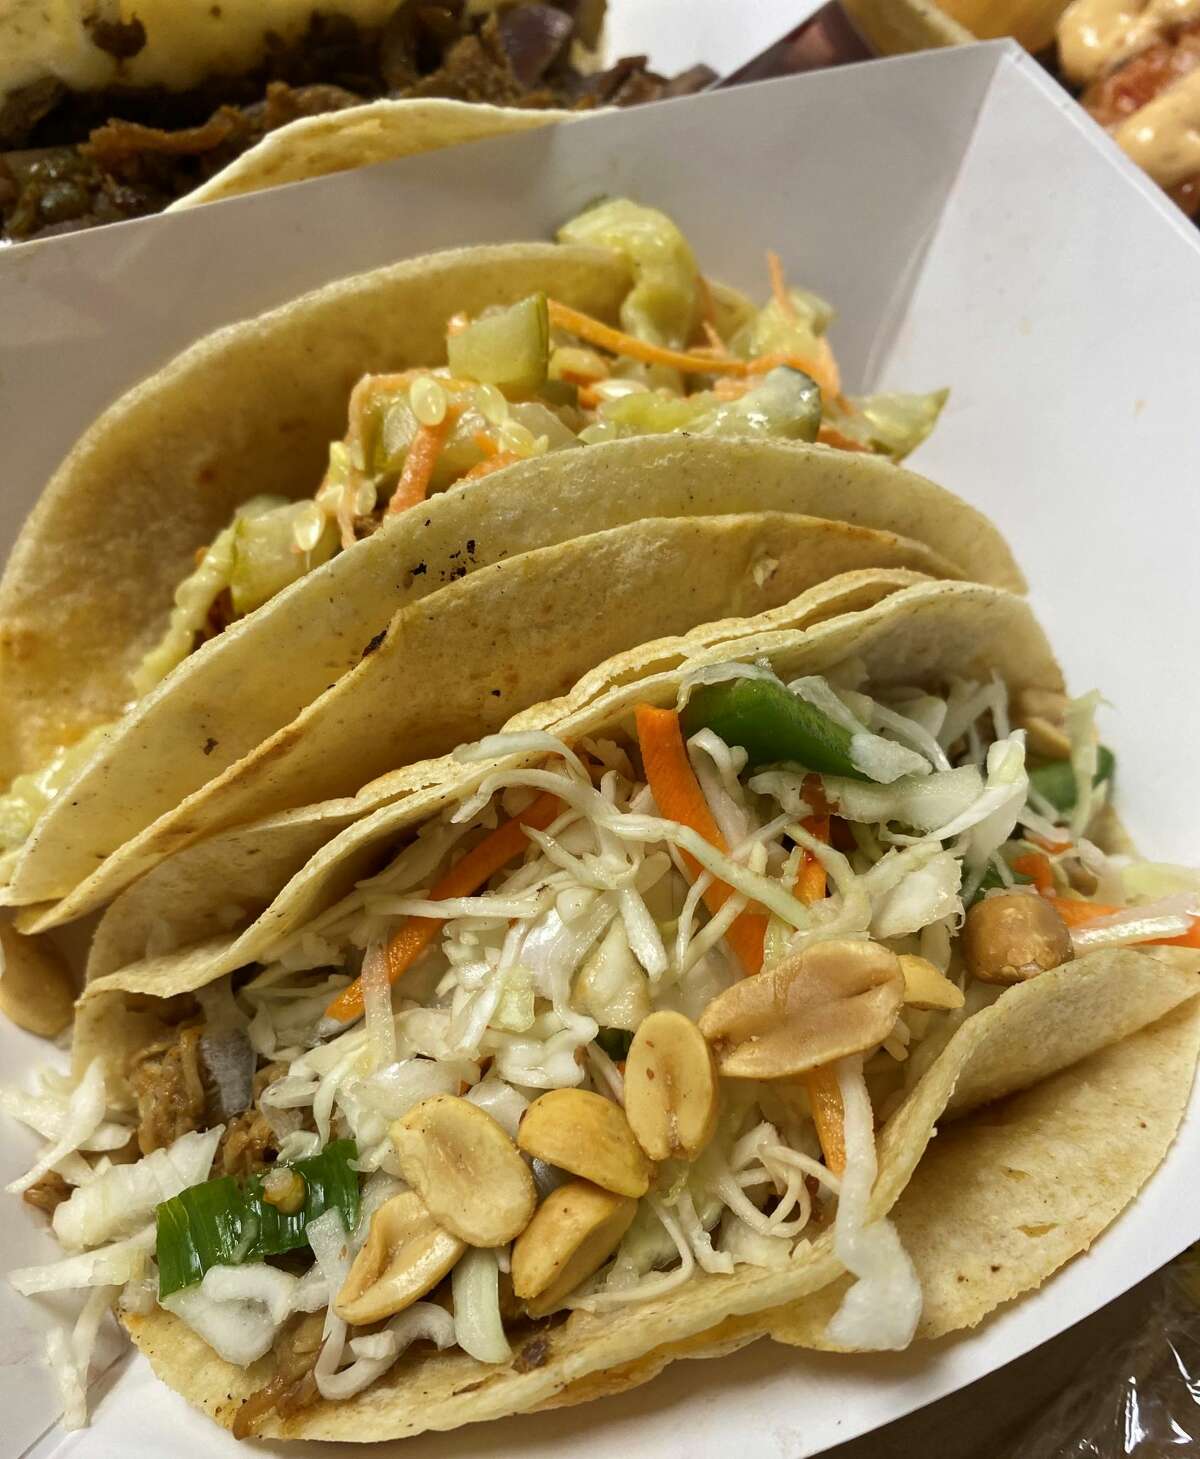 Lucky Taco’s new Vernon location offers its signature fusion-style tacos, burritos and quesadillas, with fillings like kung pao chicken (pictured), island jerk pork, Nashville hot fried chicken and Korean brisket with kimchi. 